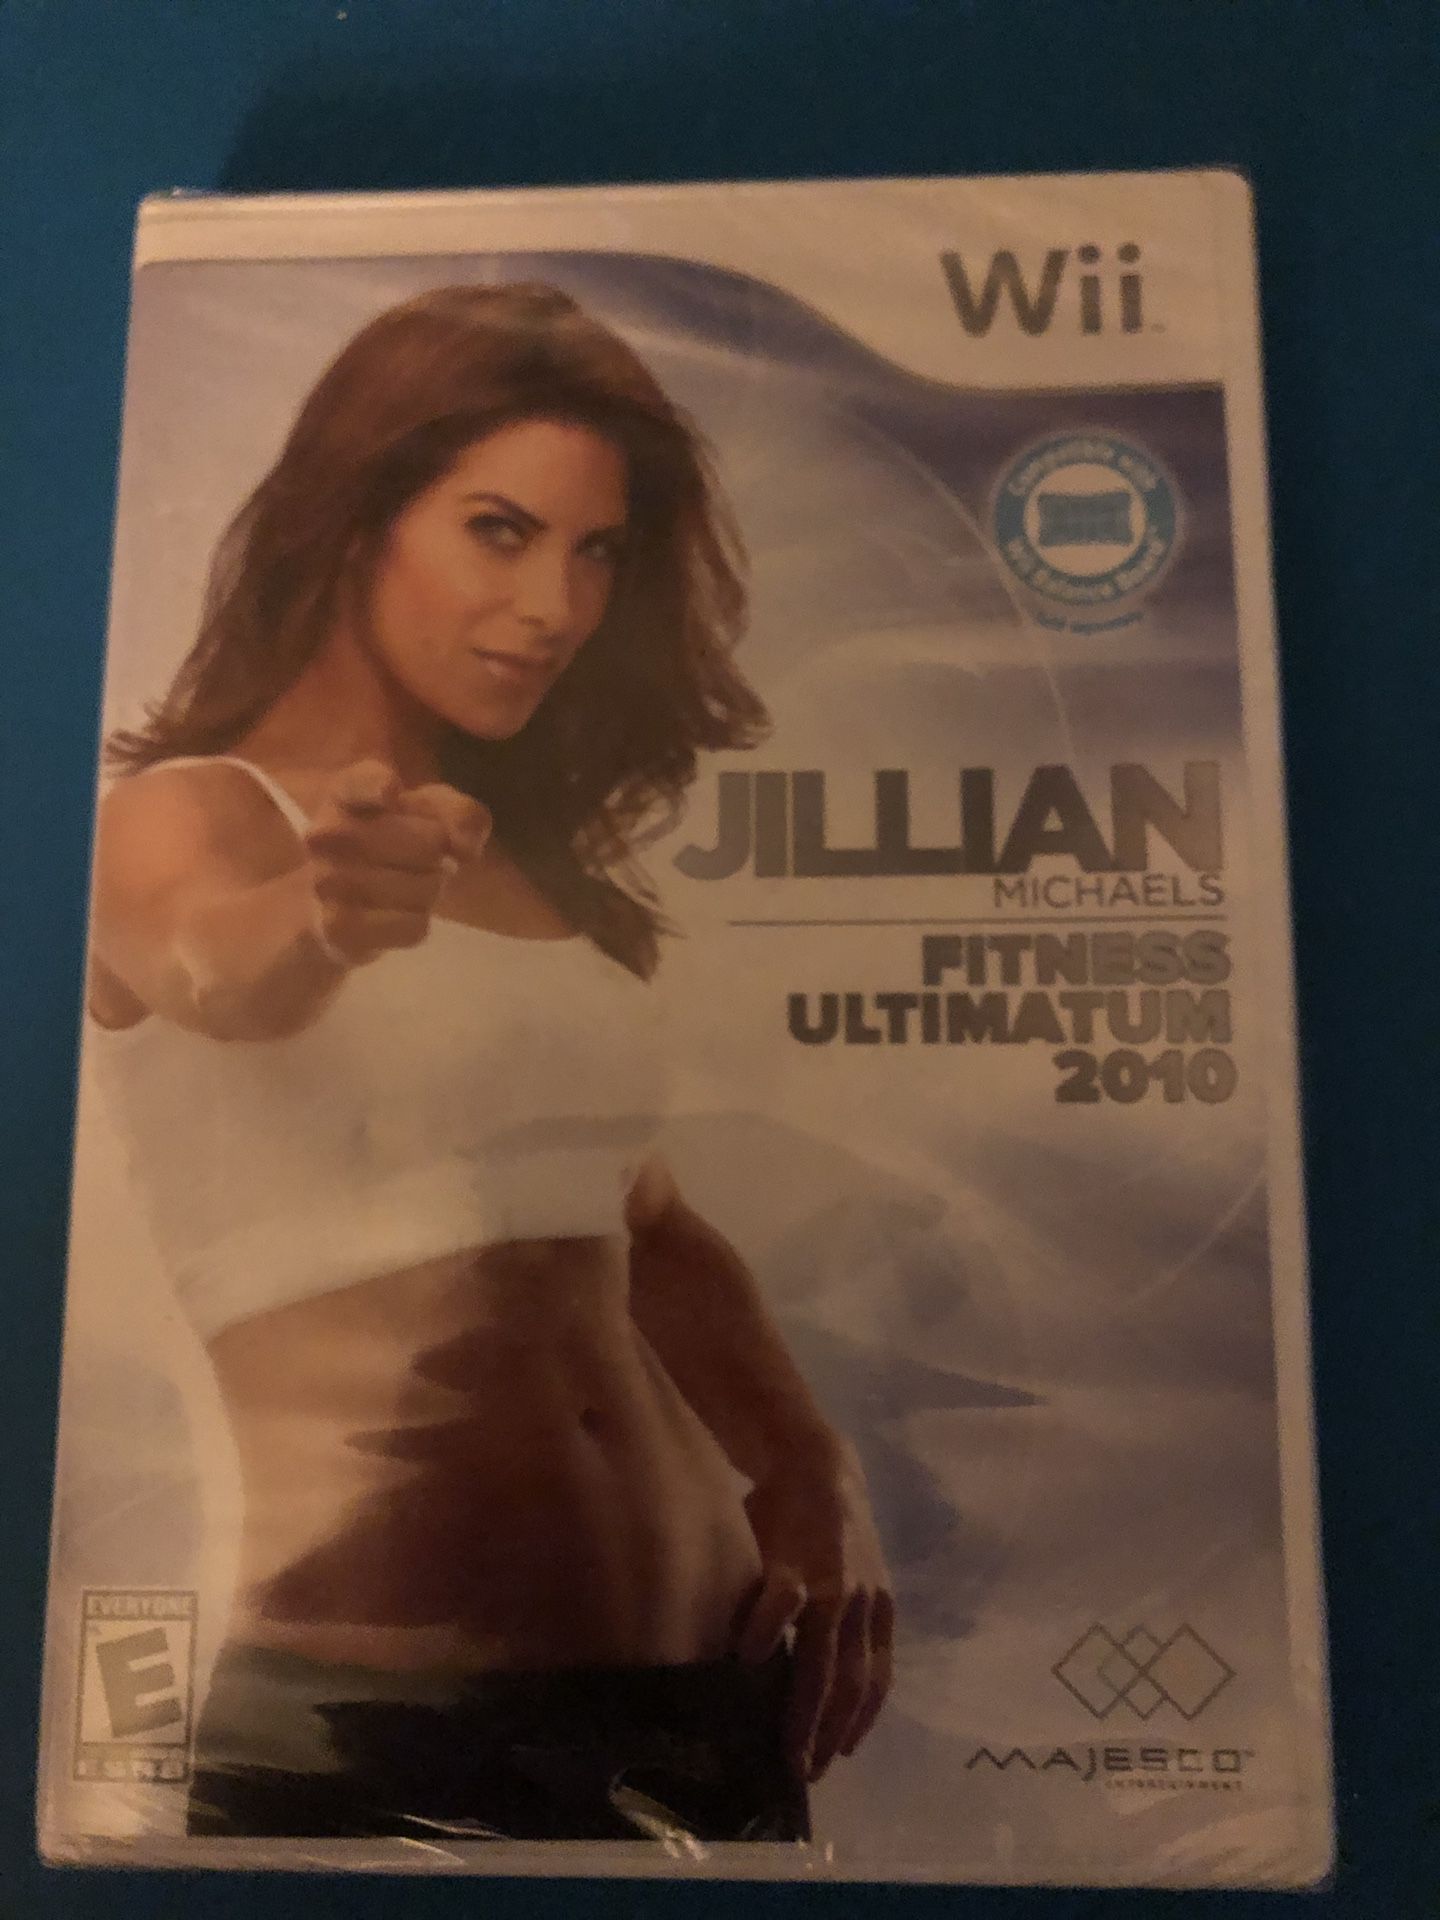 Brand new Jillian work out dvd for Wii